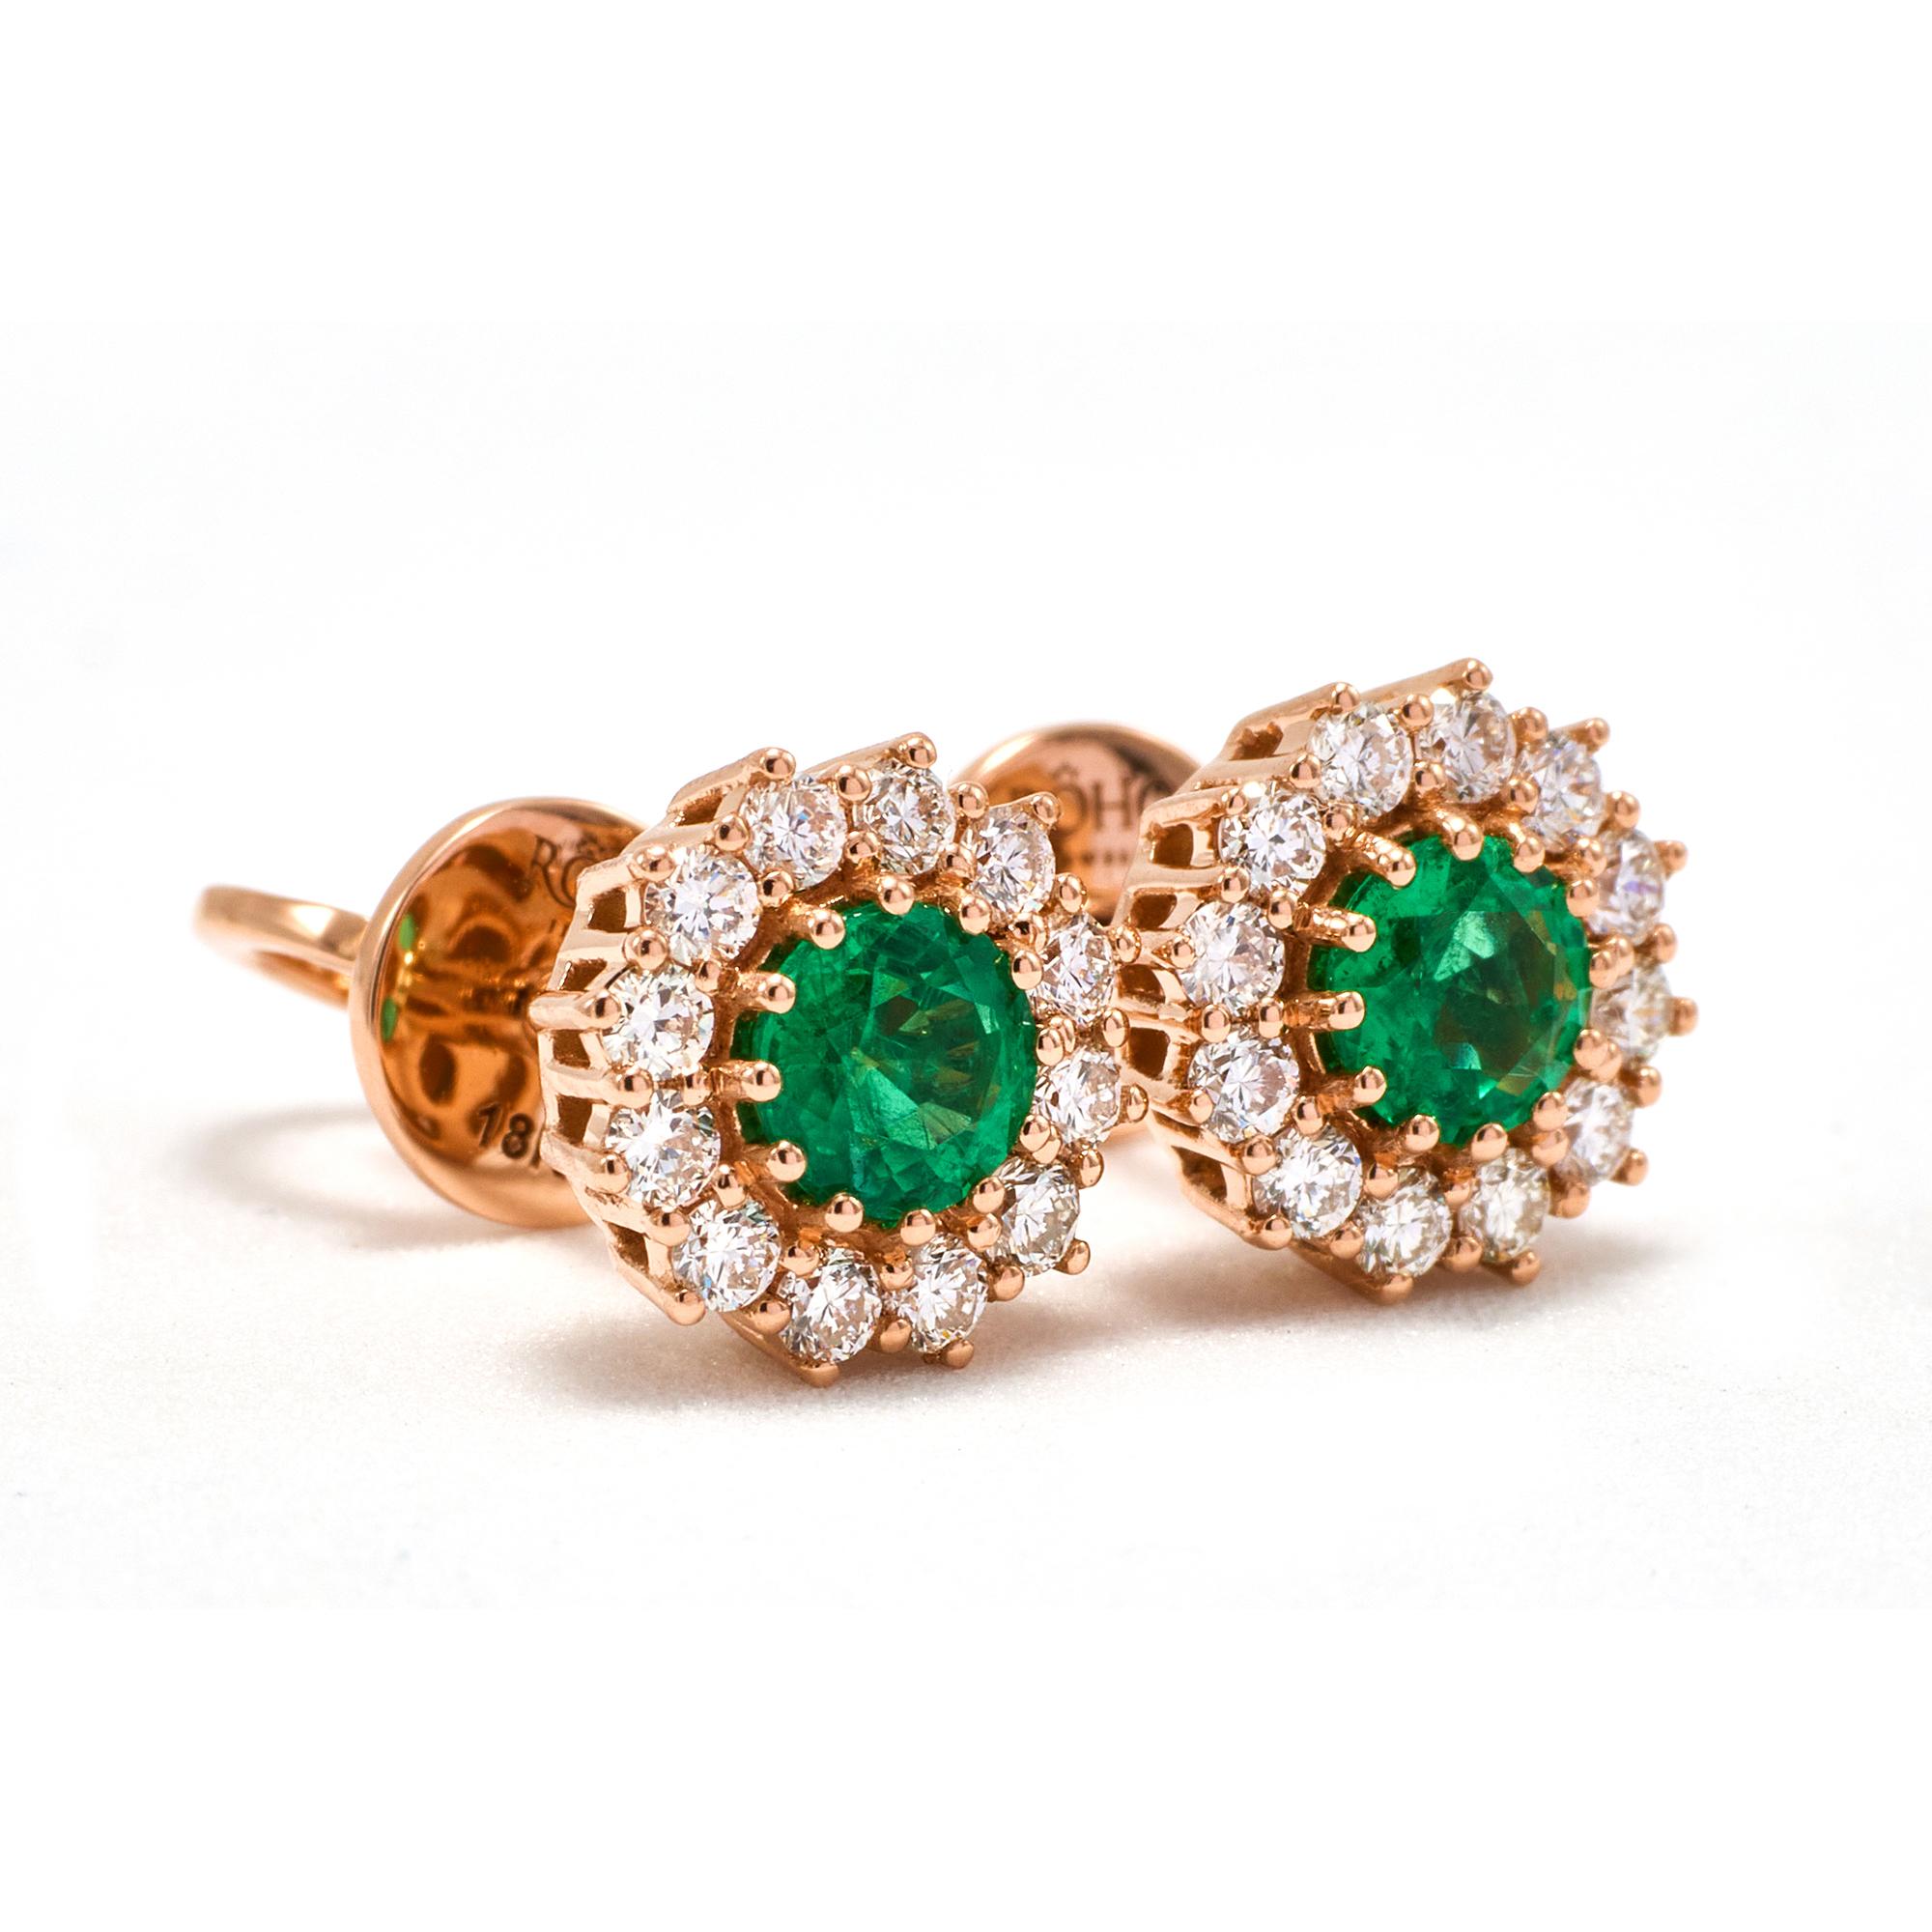 These 18k Rose Gold and Emerald Stud Earrings are a true masterpiece of fine jewelry craftsmanship. The natural, AAA quality Zambian emeralds are masterfully set in a classic, elegant solitaire design, surrounded by sparkling natural diamonds of the